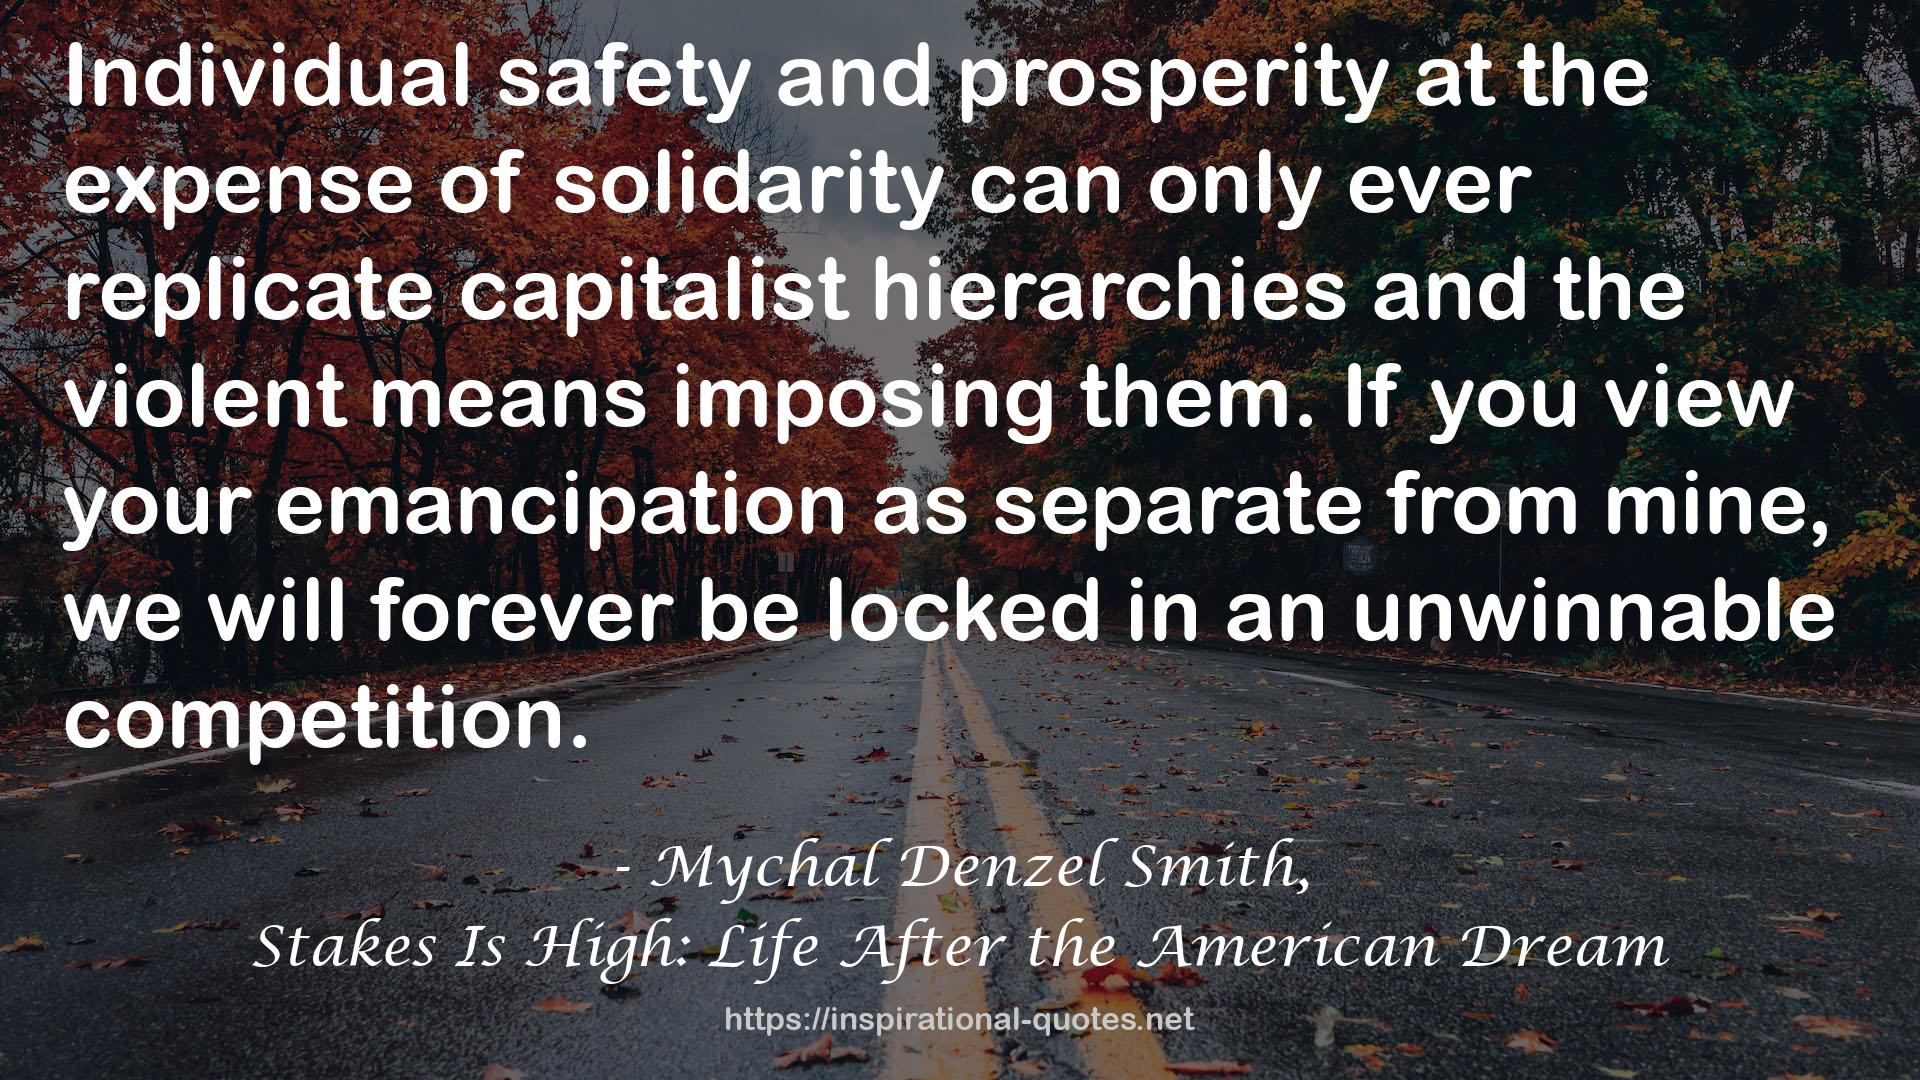 Stakes Is High: Life After the American Dream QUOTES